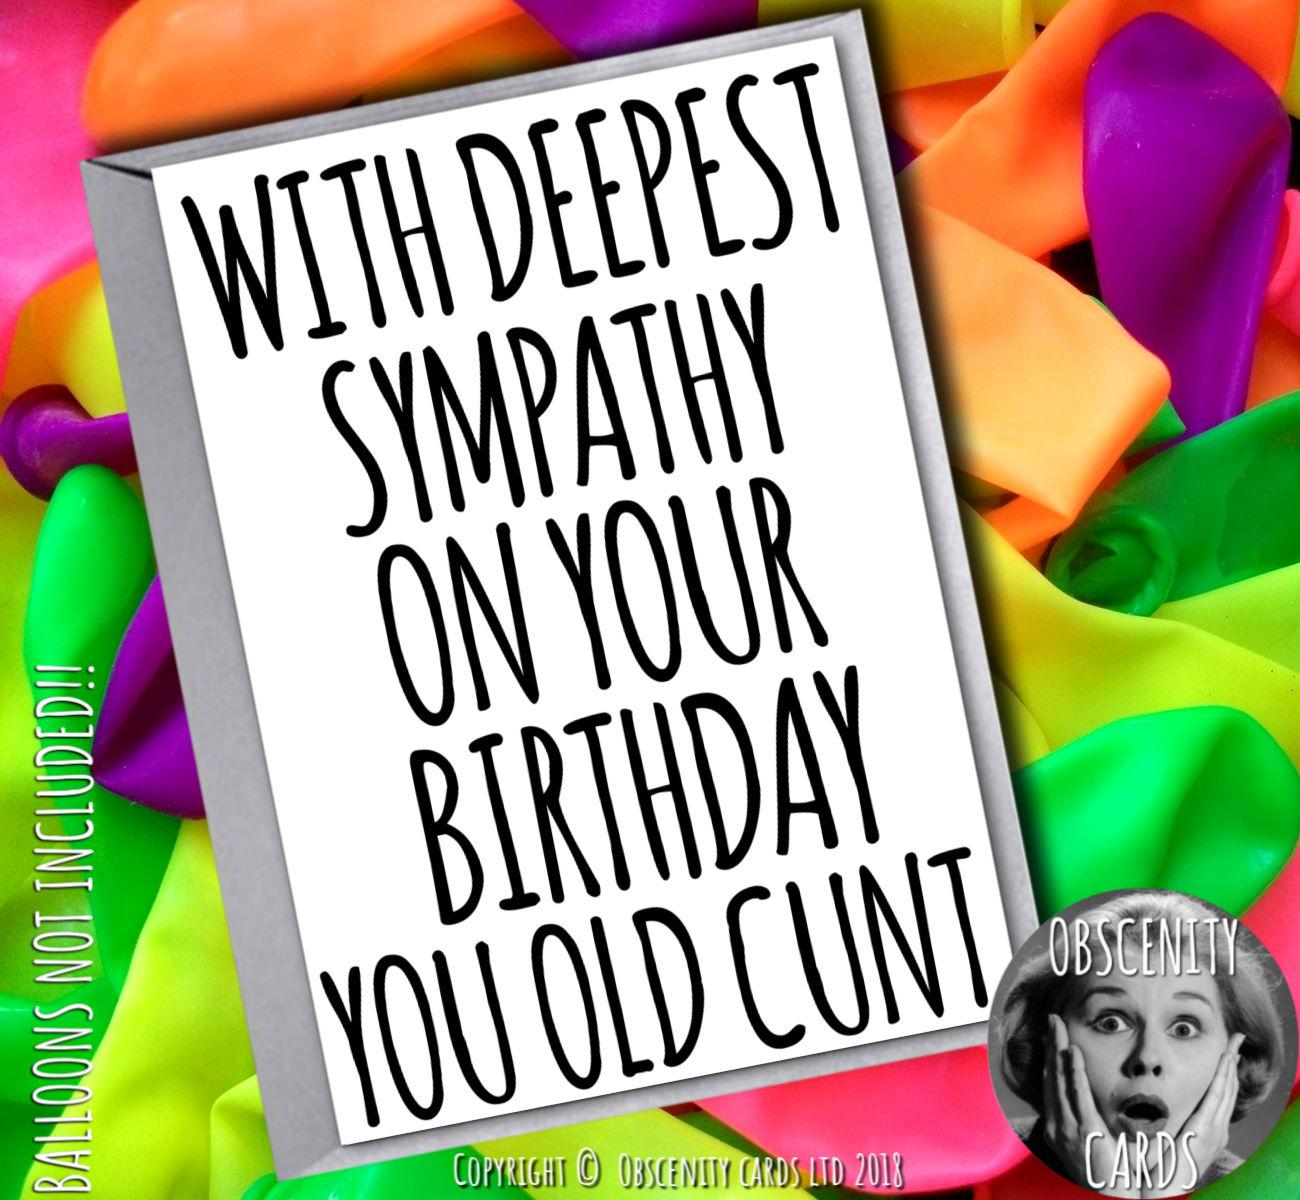 WITH DEEPEST SYMPATHY ON YOUR BIRTHDAY. Obscene funny offensive birthday cards by Obscenity cards. Obscene Funny Cards, Pens, Party Hats, Key rings, Magnets, Lighters & Loads More!